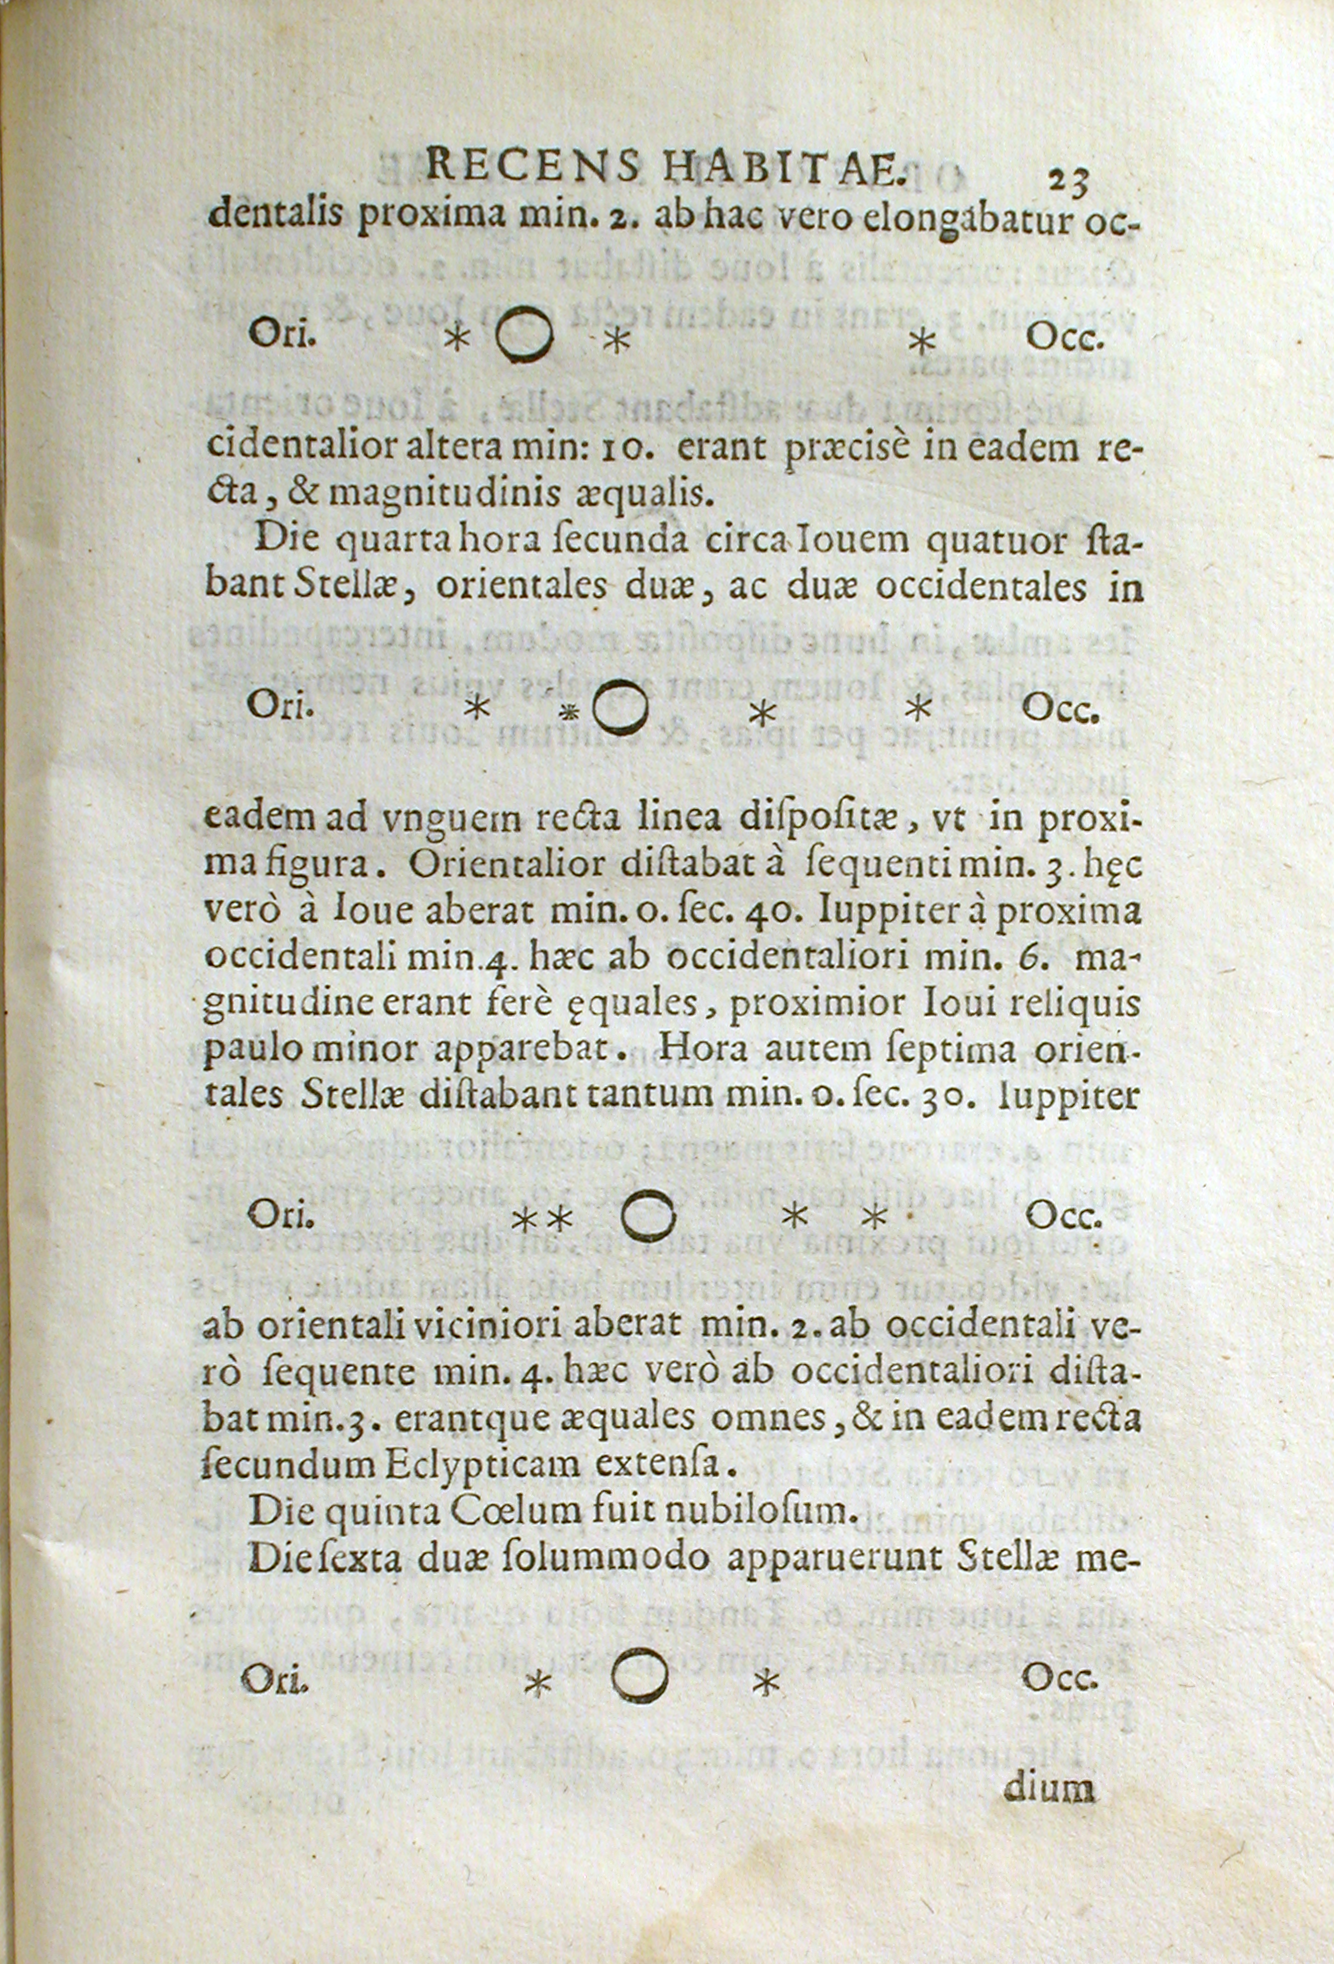 Galileo's drawings of Jupiter and its Medicean Stars from Sidereus Nuncius. Image courtesy of the History of Science Collections, University of Oklahoma Libraries.